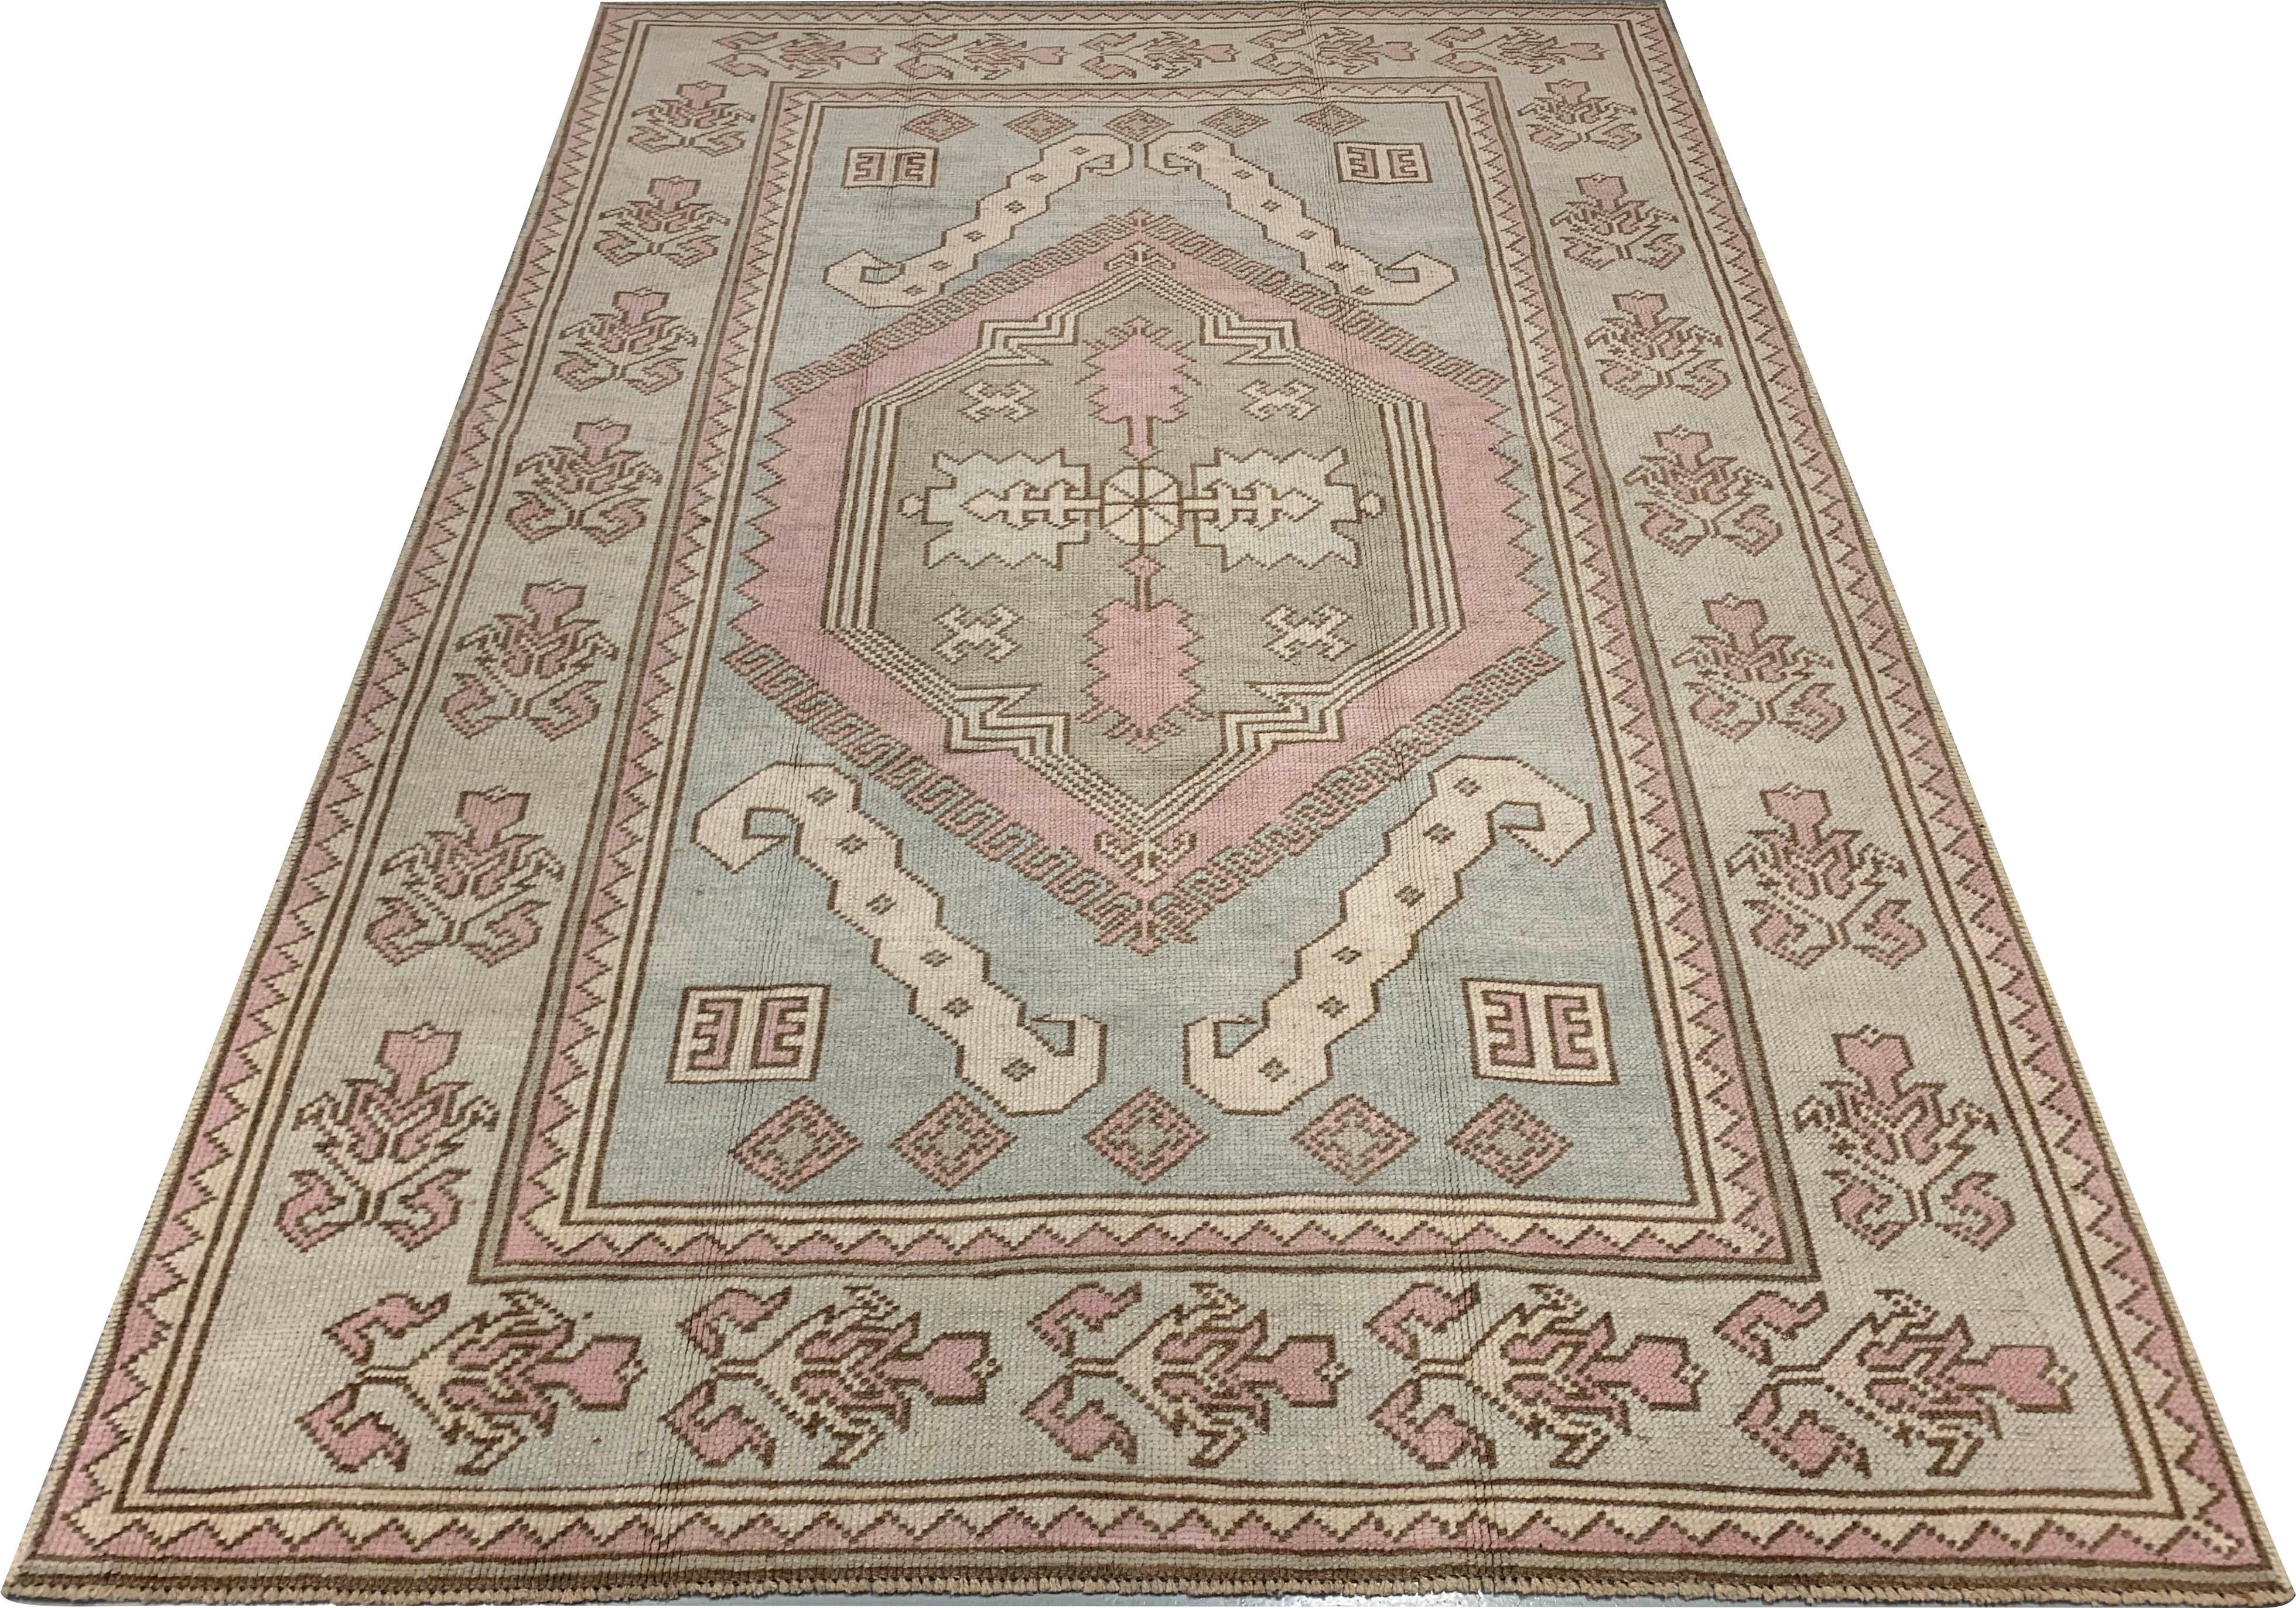 Vintage Turkish Oushak rug 4'7 x 6'7. Light colored Oushaks are among the most popular oriental carpets, known for the high quality of their wool their beautiful patterns and warm colors. These designer favorites will complement any interior.